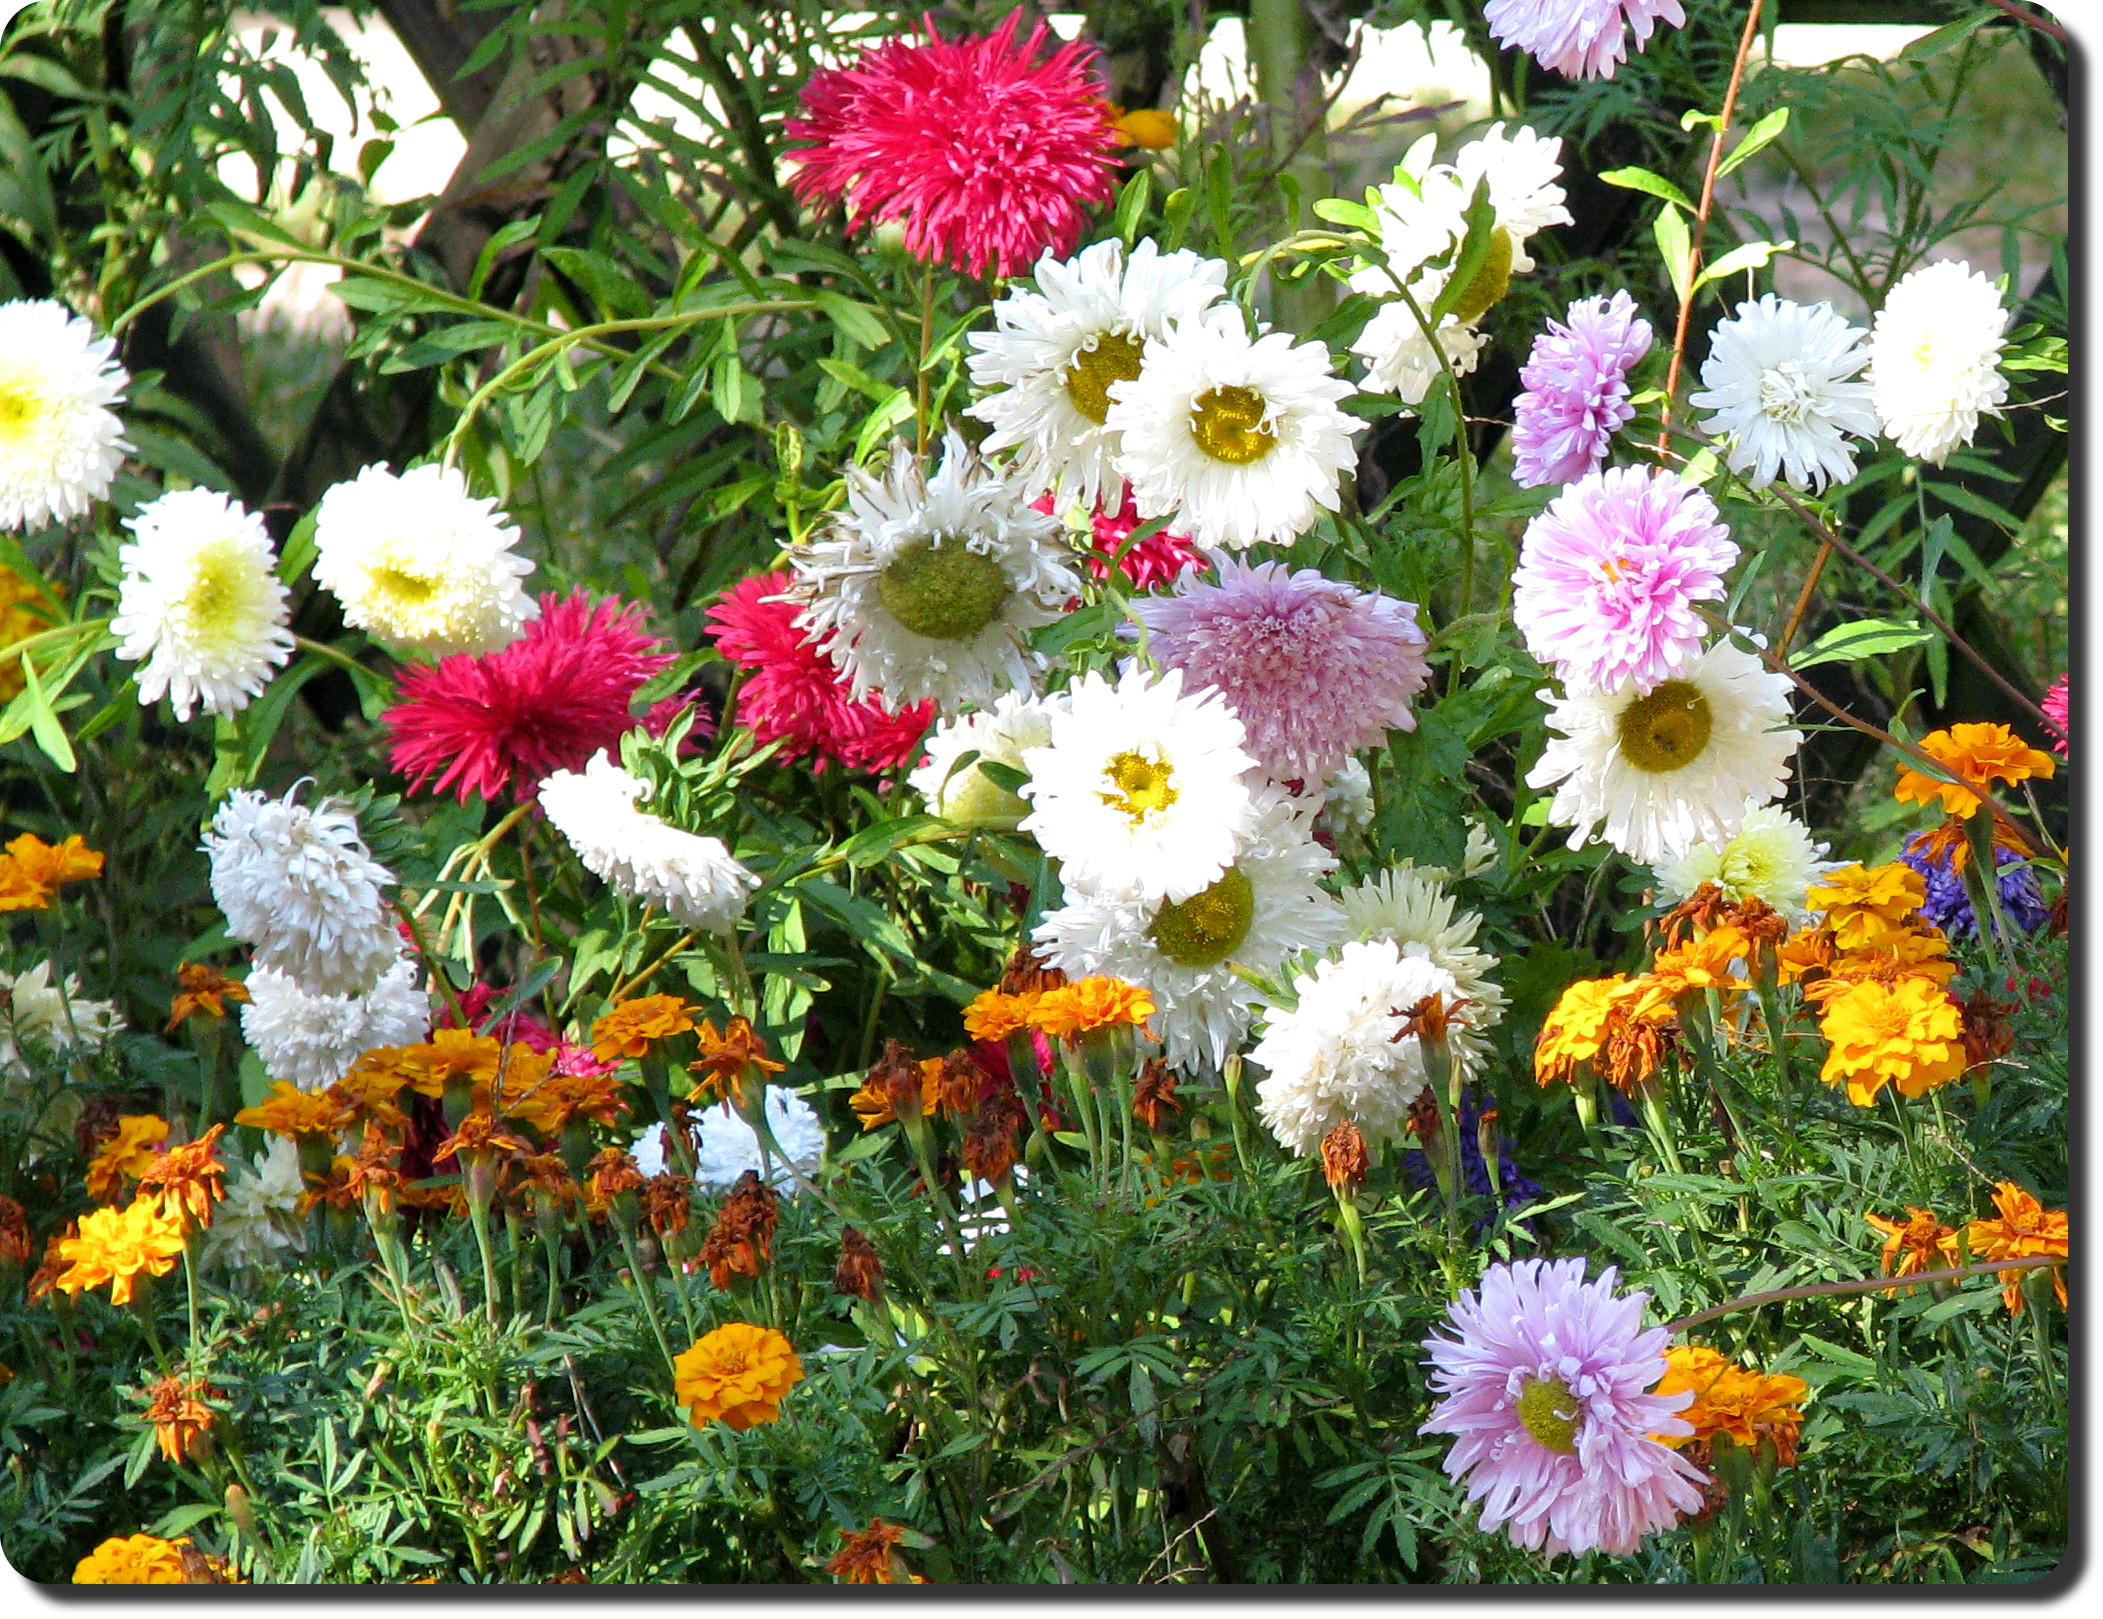 many different colored flowers in a garden